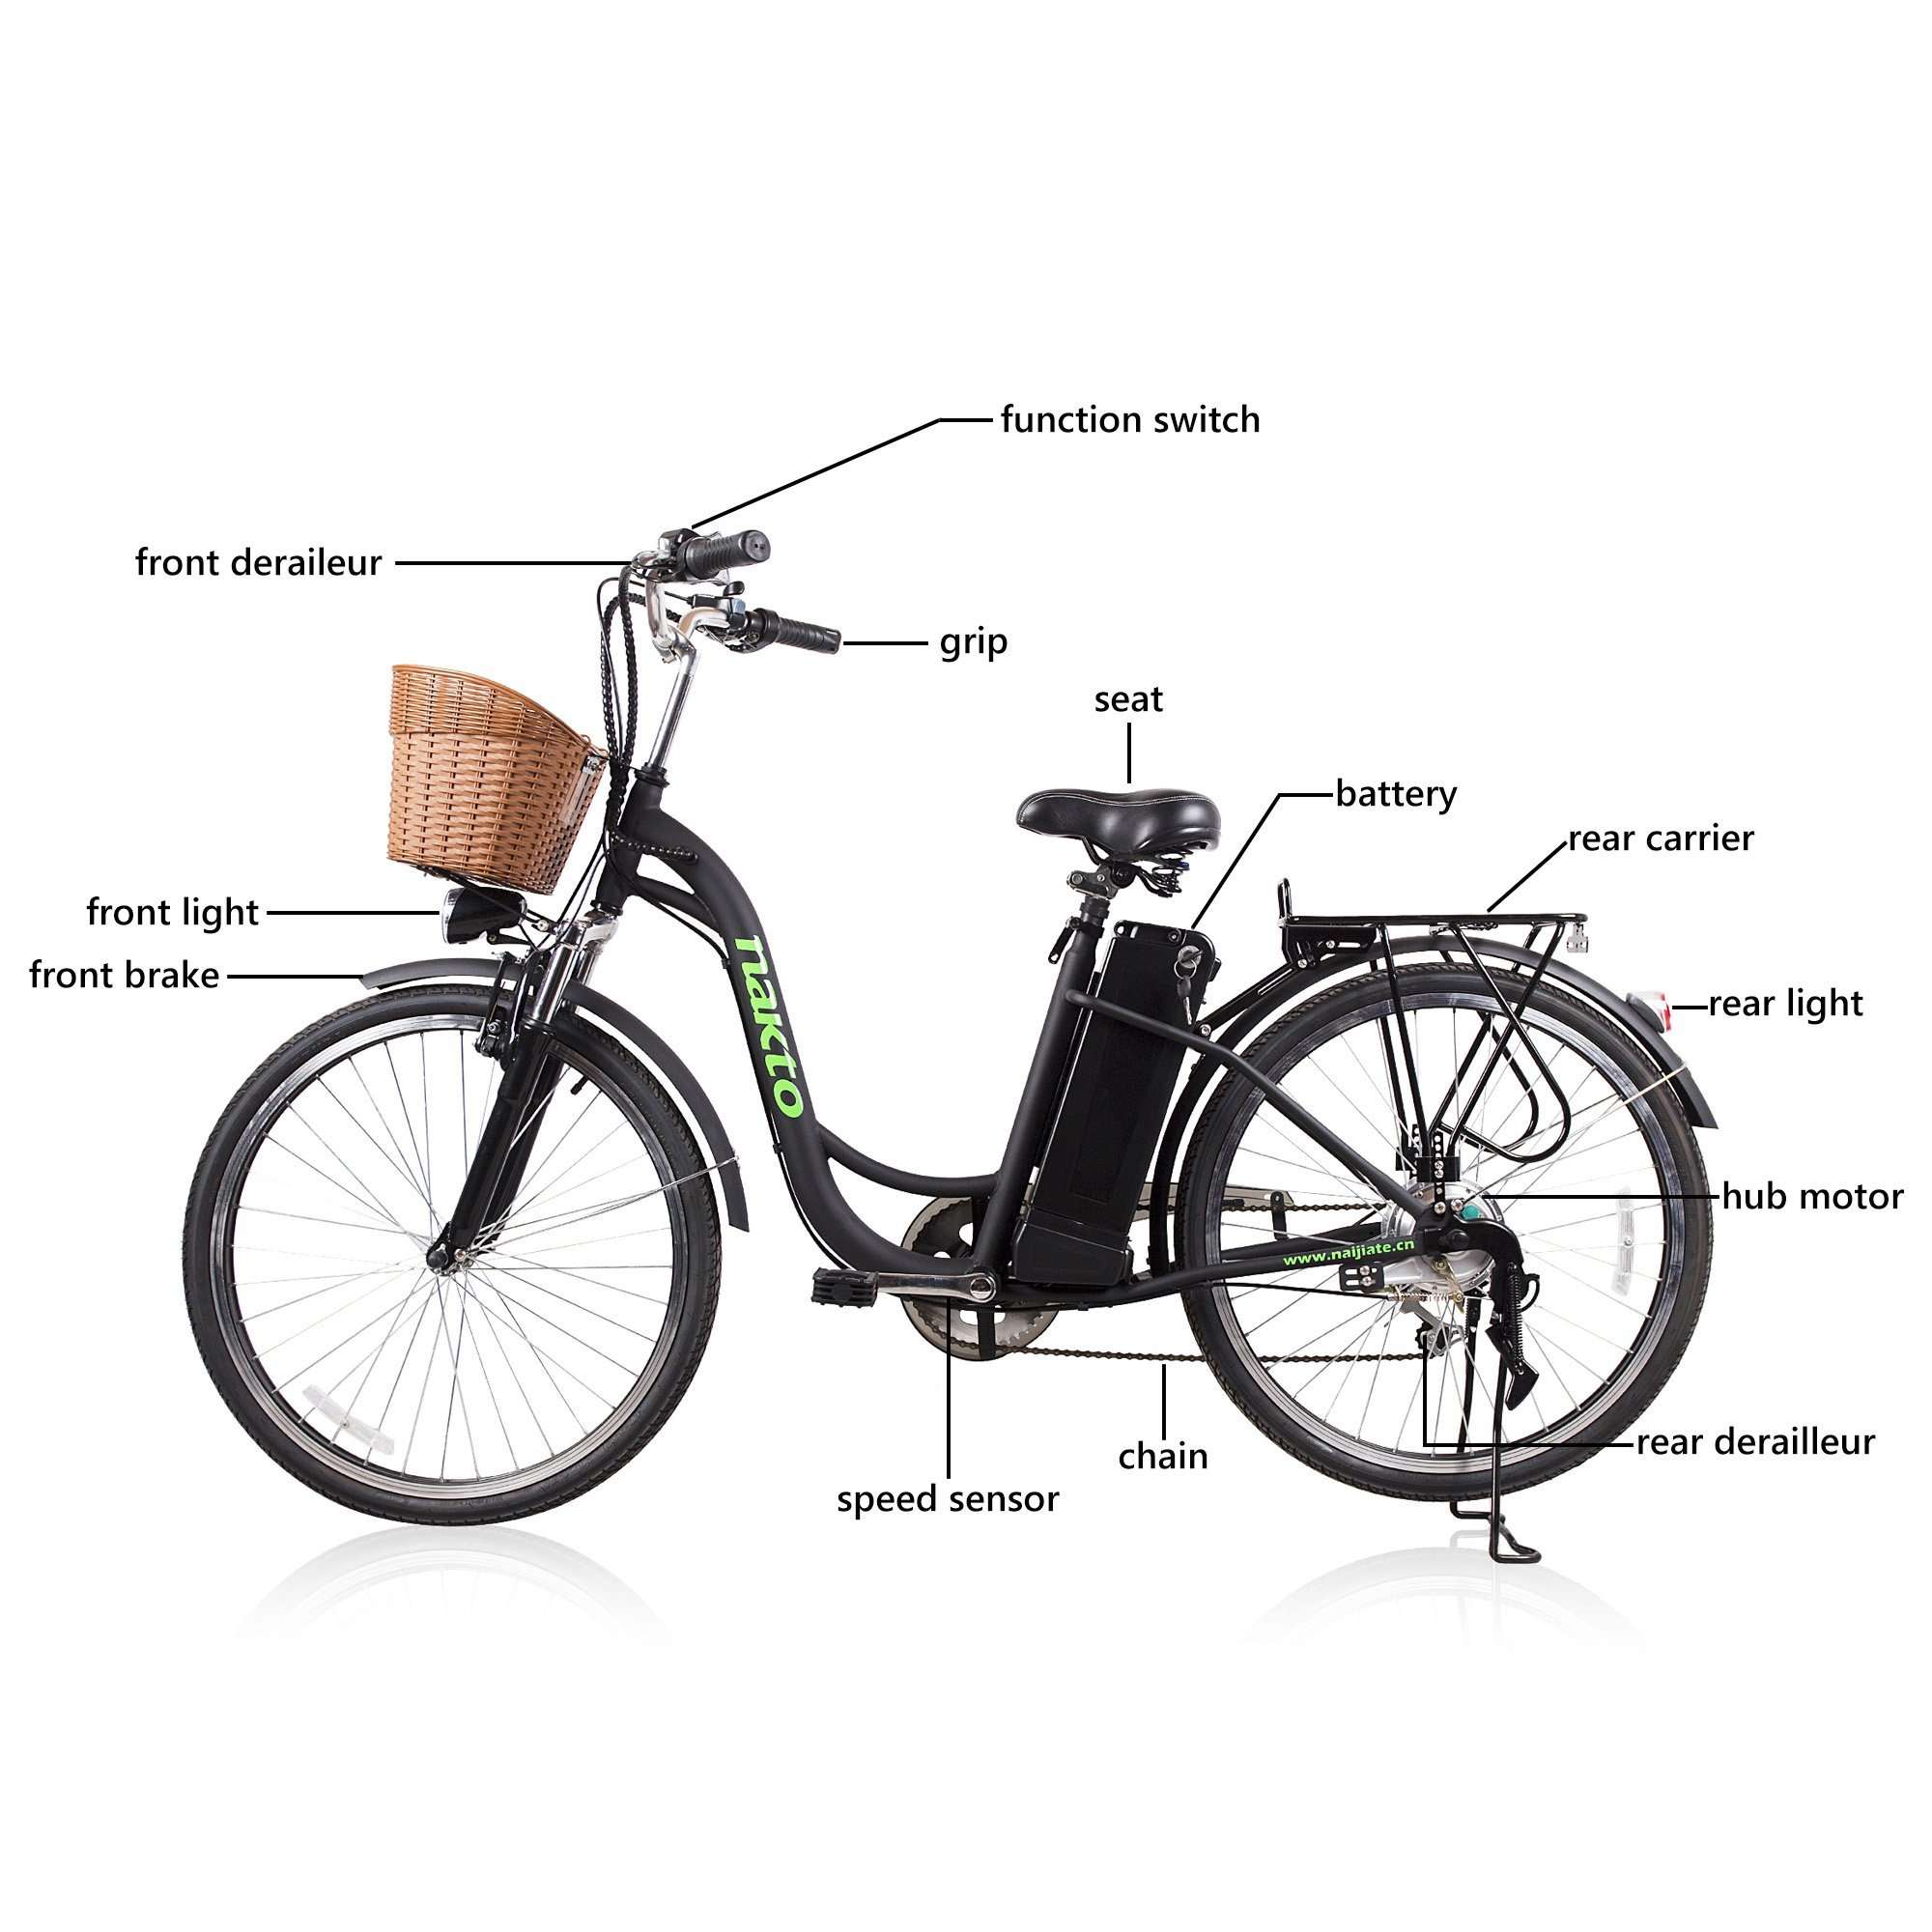 NAKTO 26 inch 250W Motor with Peak 350W 19 MPH Camel Electric Bicycle 6 Speed E-Bike 36V Lithium Battery Female/Young Adult Black New